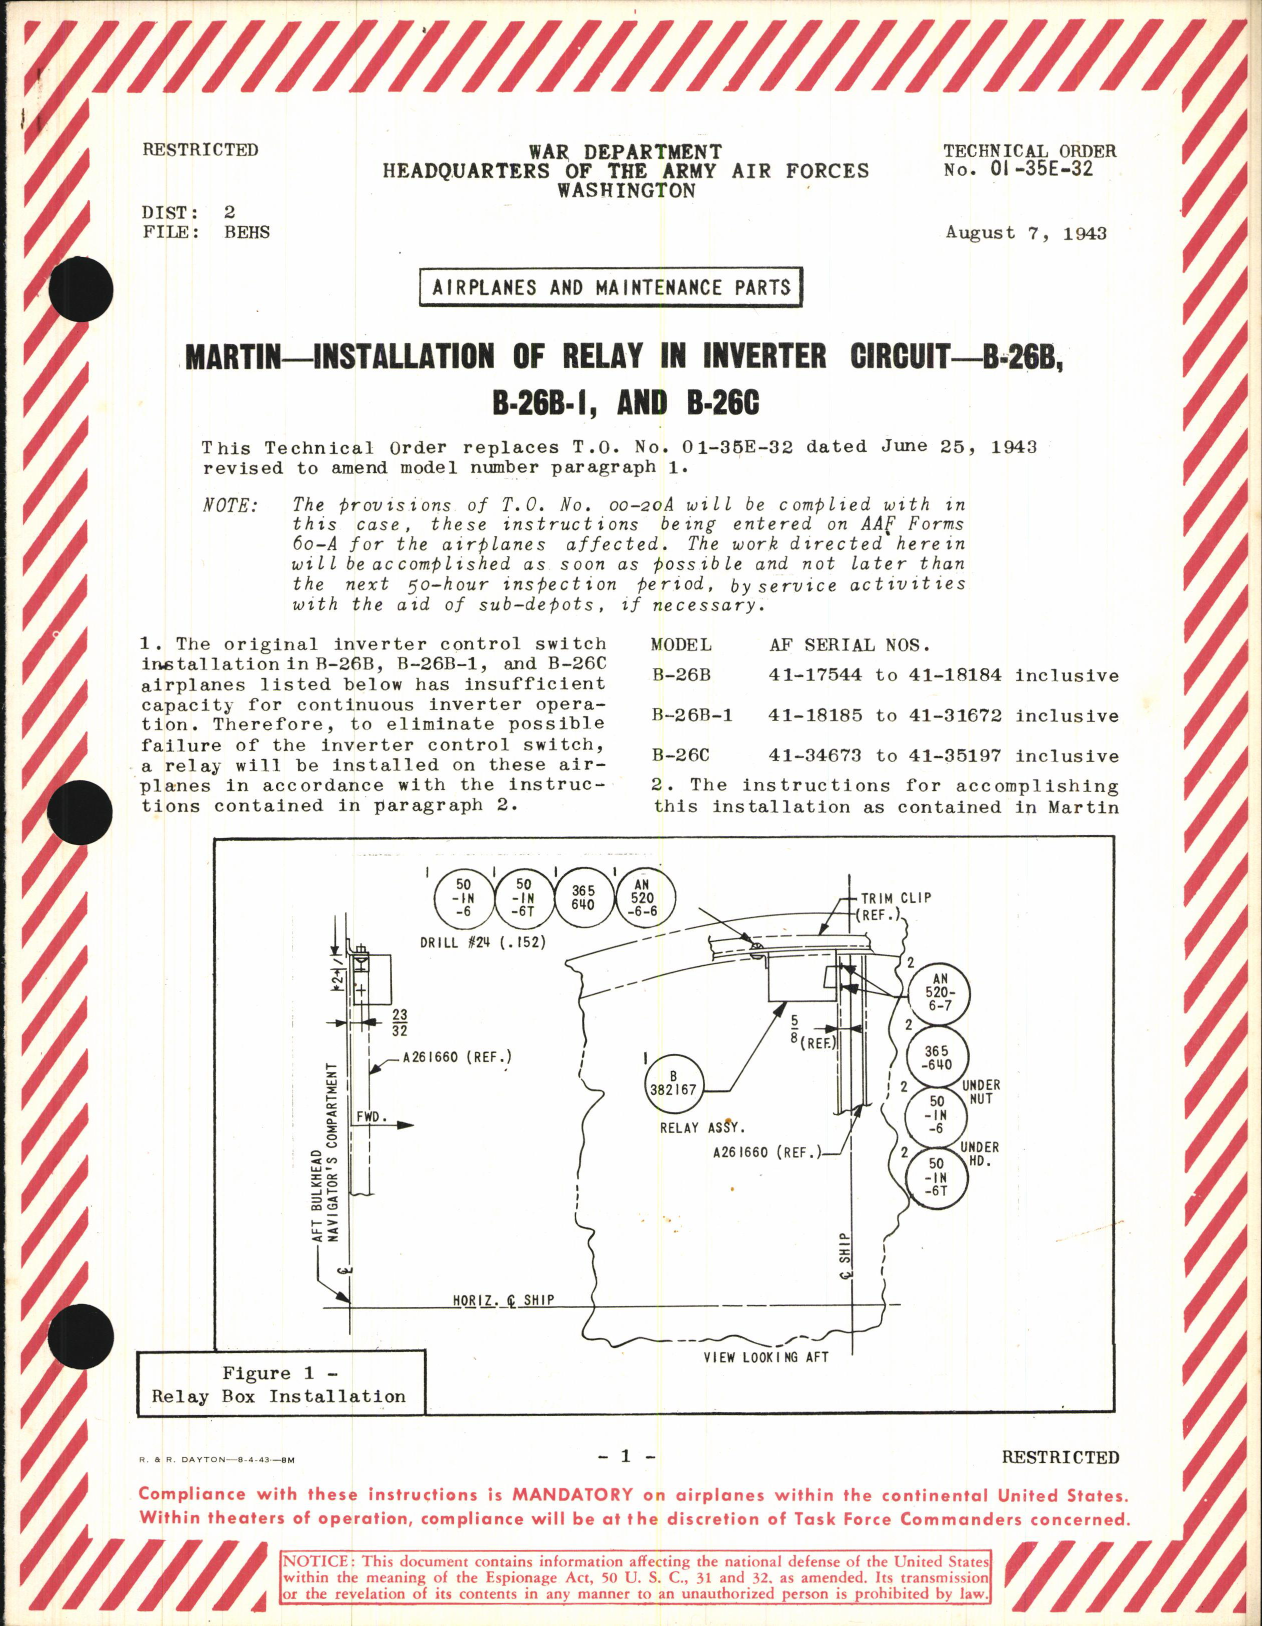 Sample page 1 from AirCorps Library document: Installation of Relay in Inverter Circuit for B-26B, B-26B-1, and B-26C